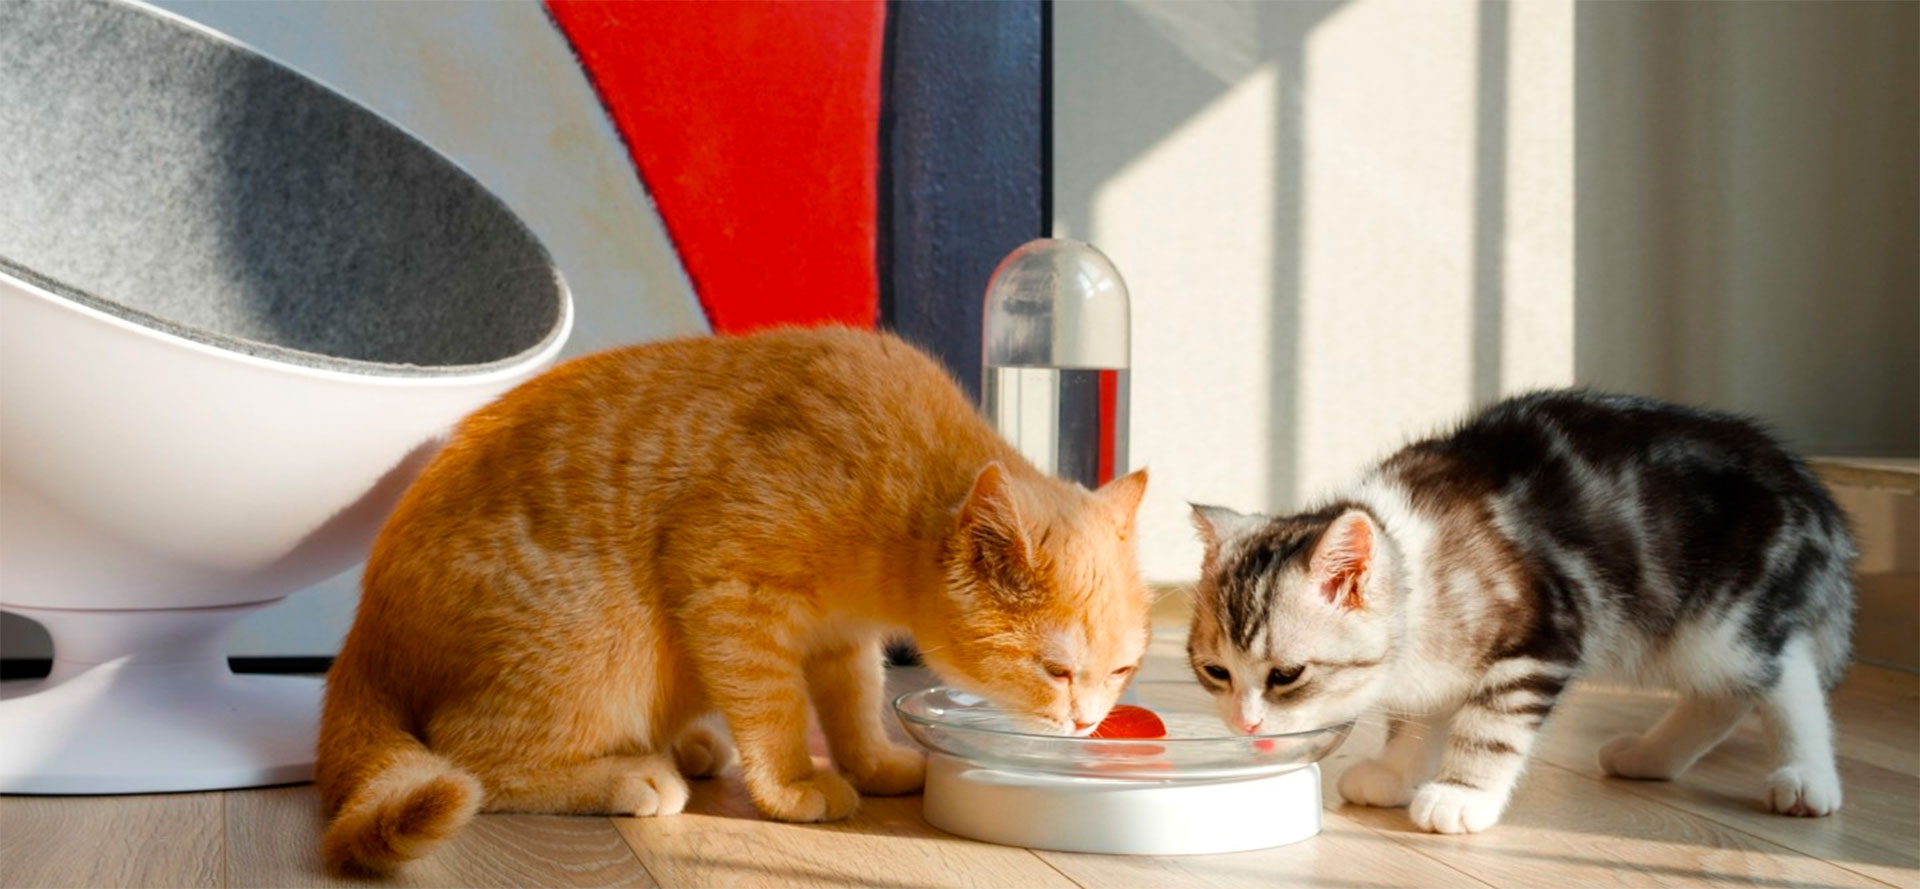 Water Fountain For Cats.